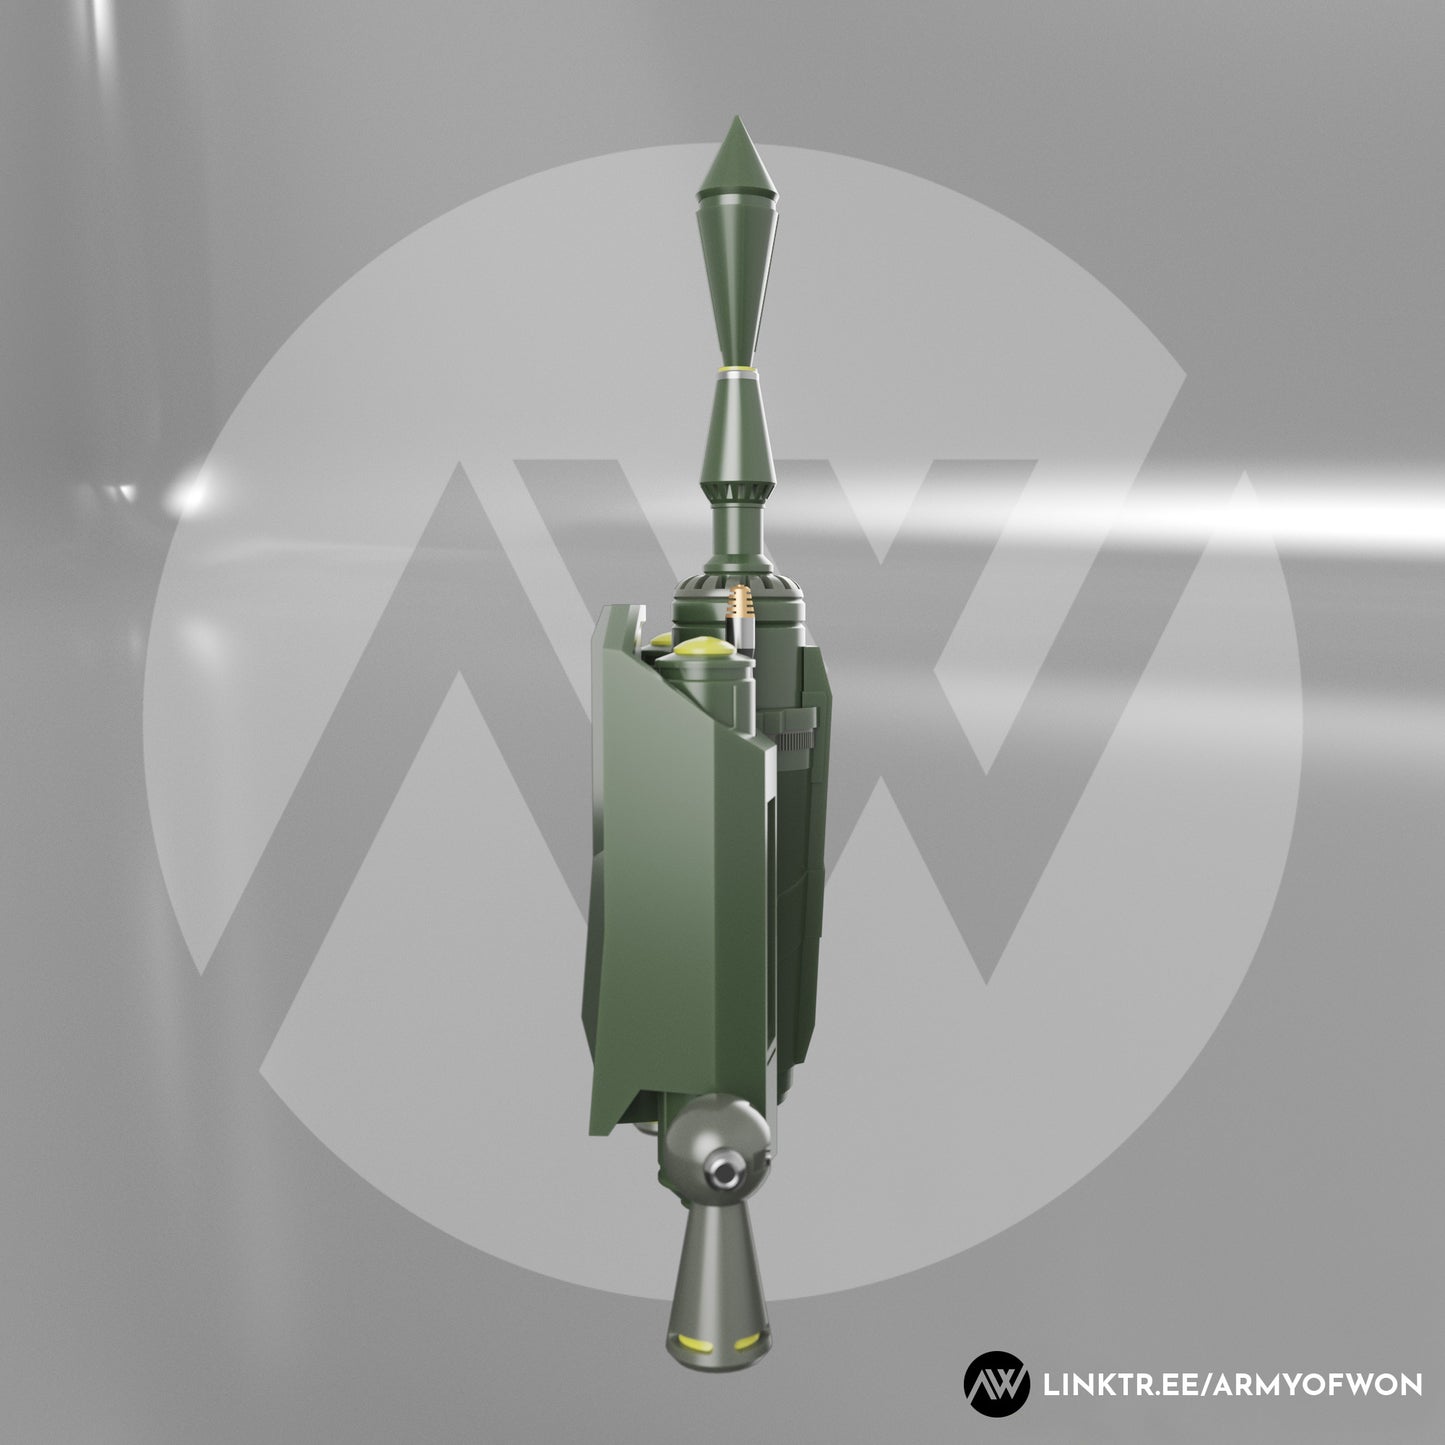 Boba Fett Inspired Jetpack from Star Wars and The Mandalorian - STL only for personal print